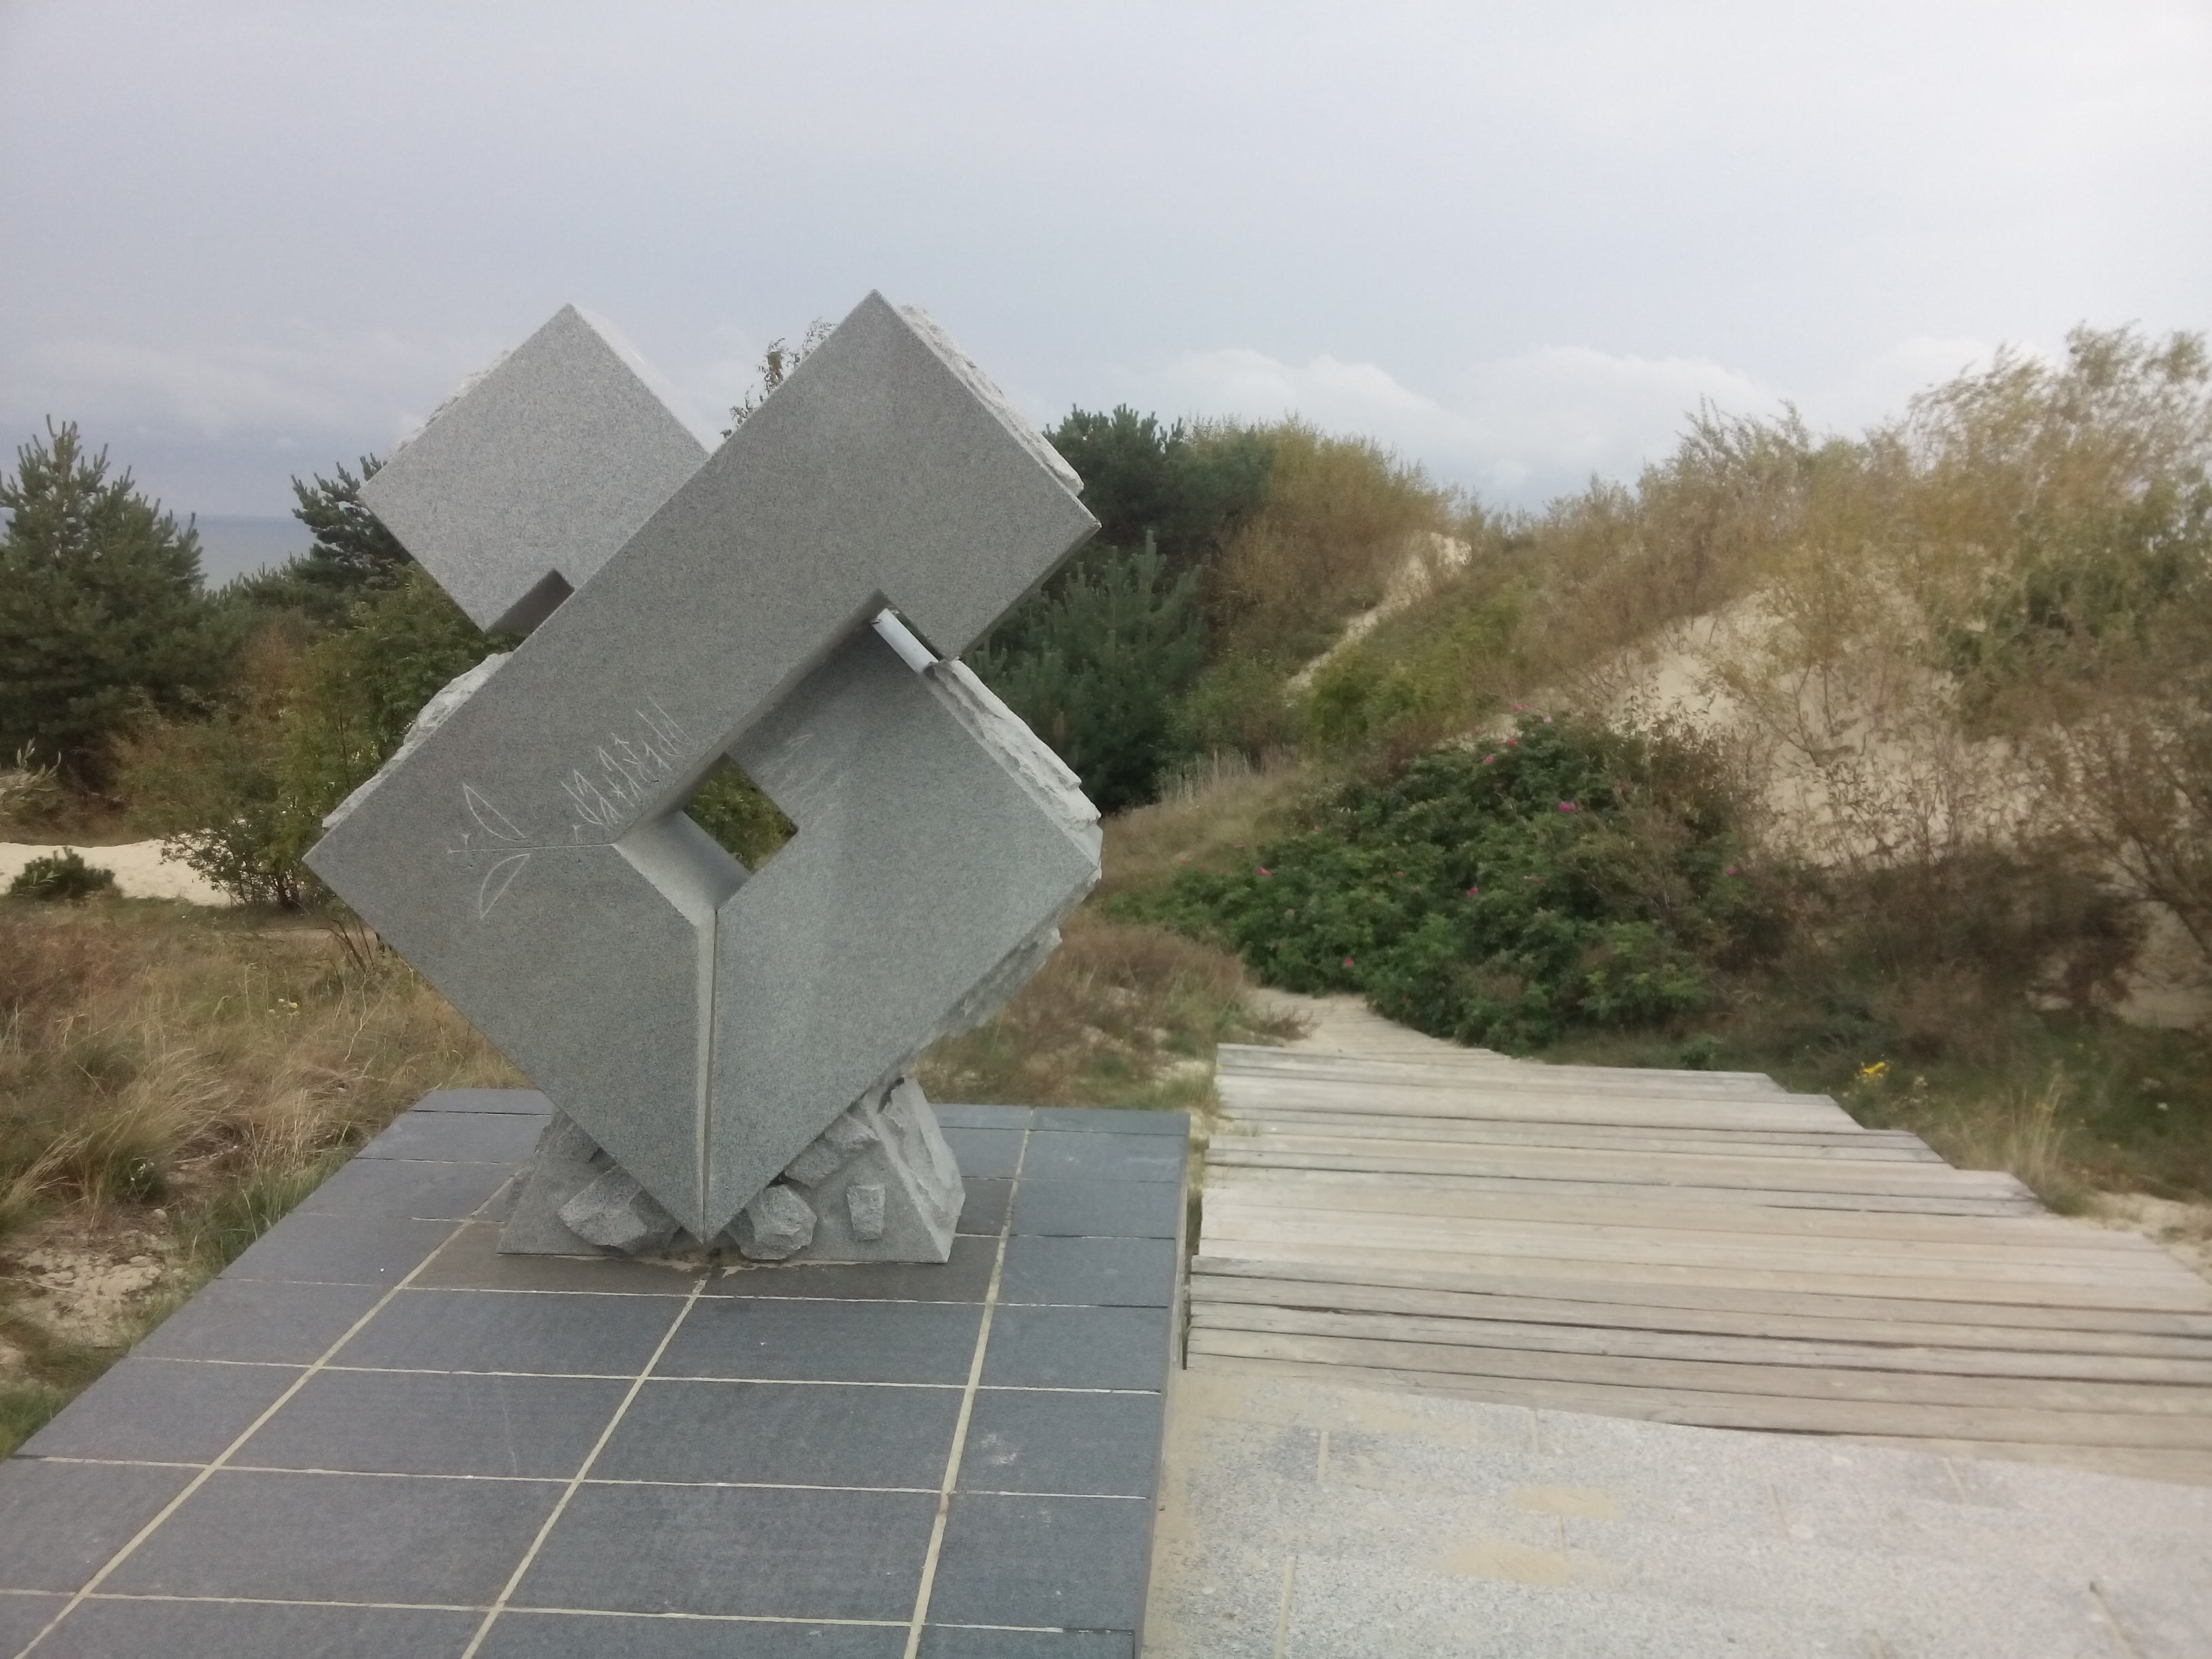 A grey stone sculpture in an abstract diamond shape sits amongst grassy sand dunes